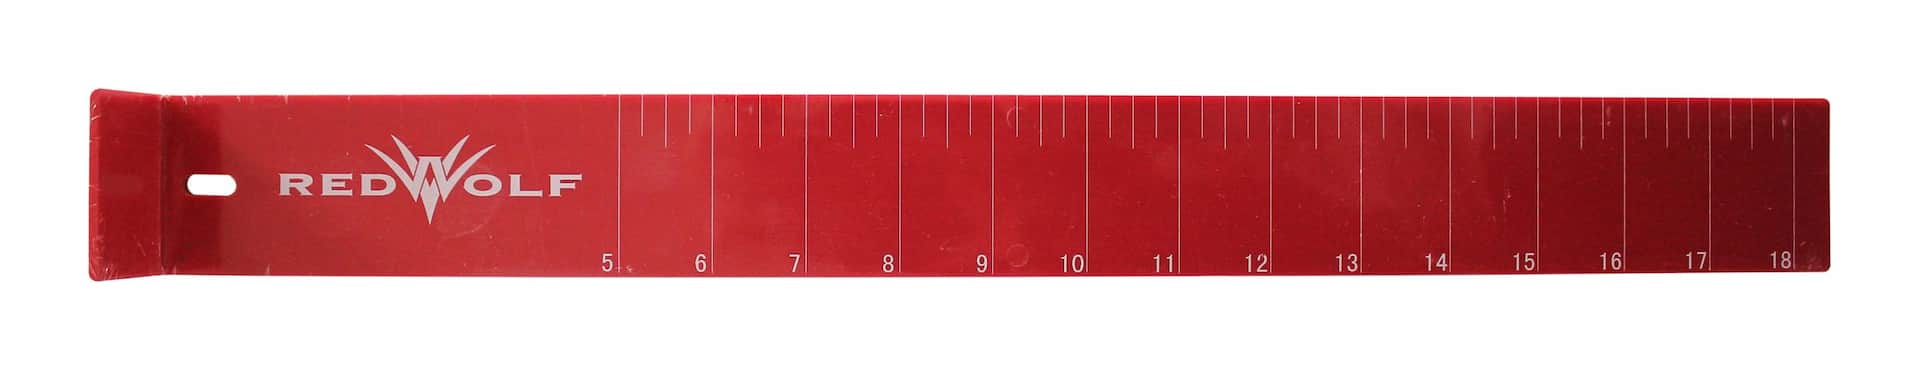 Red Wolf Plastic Ruler, 18-in